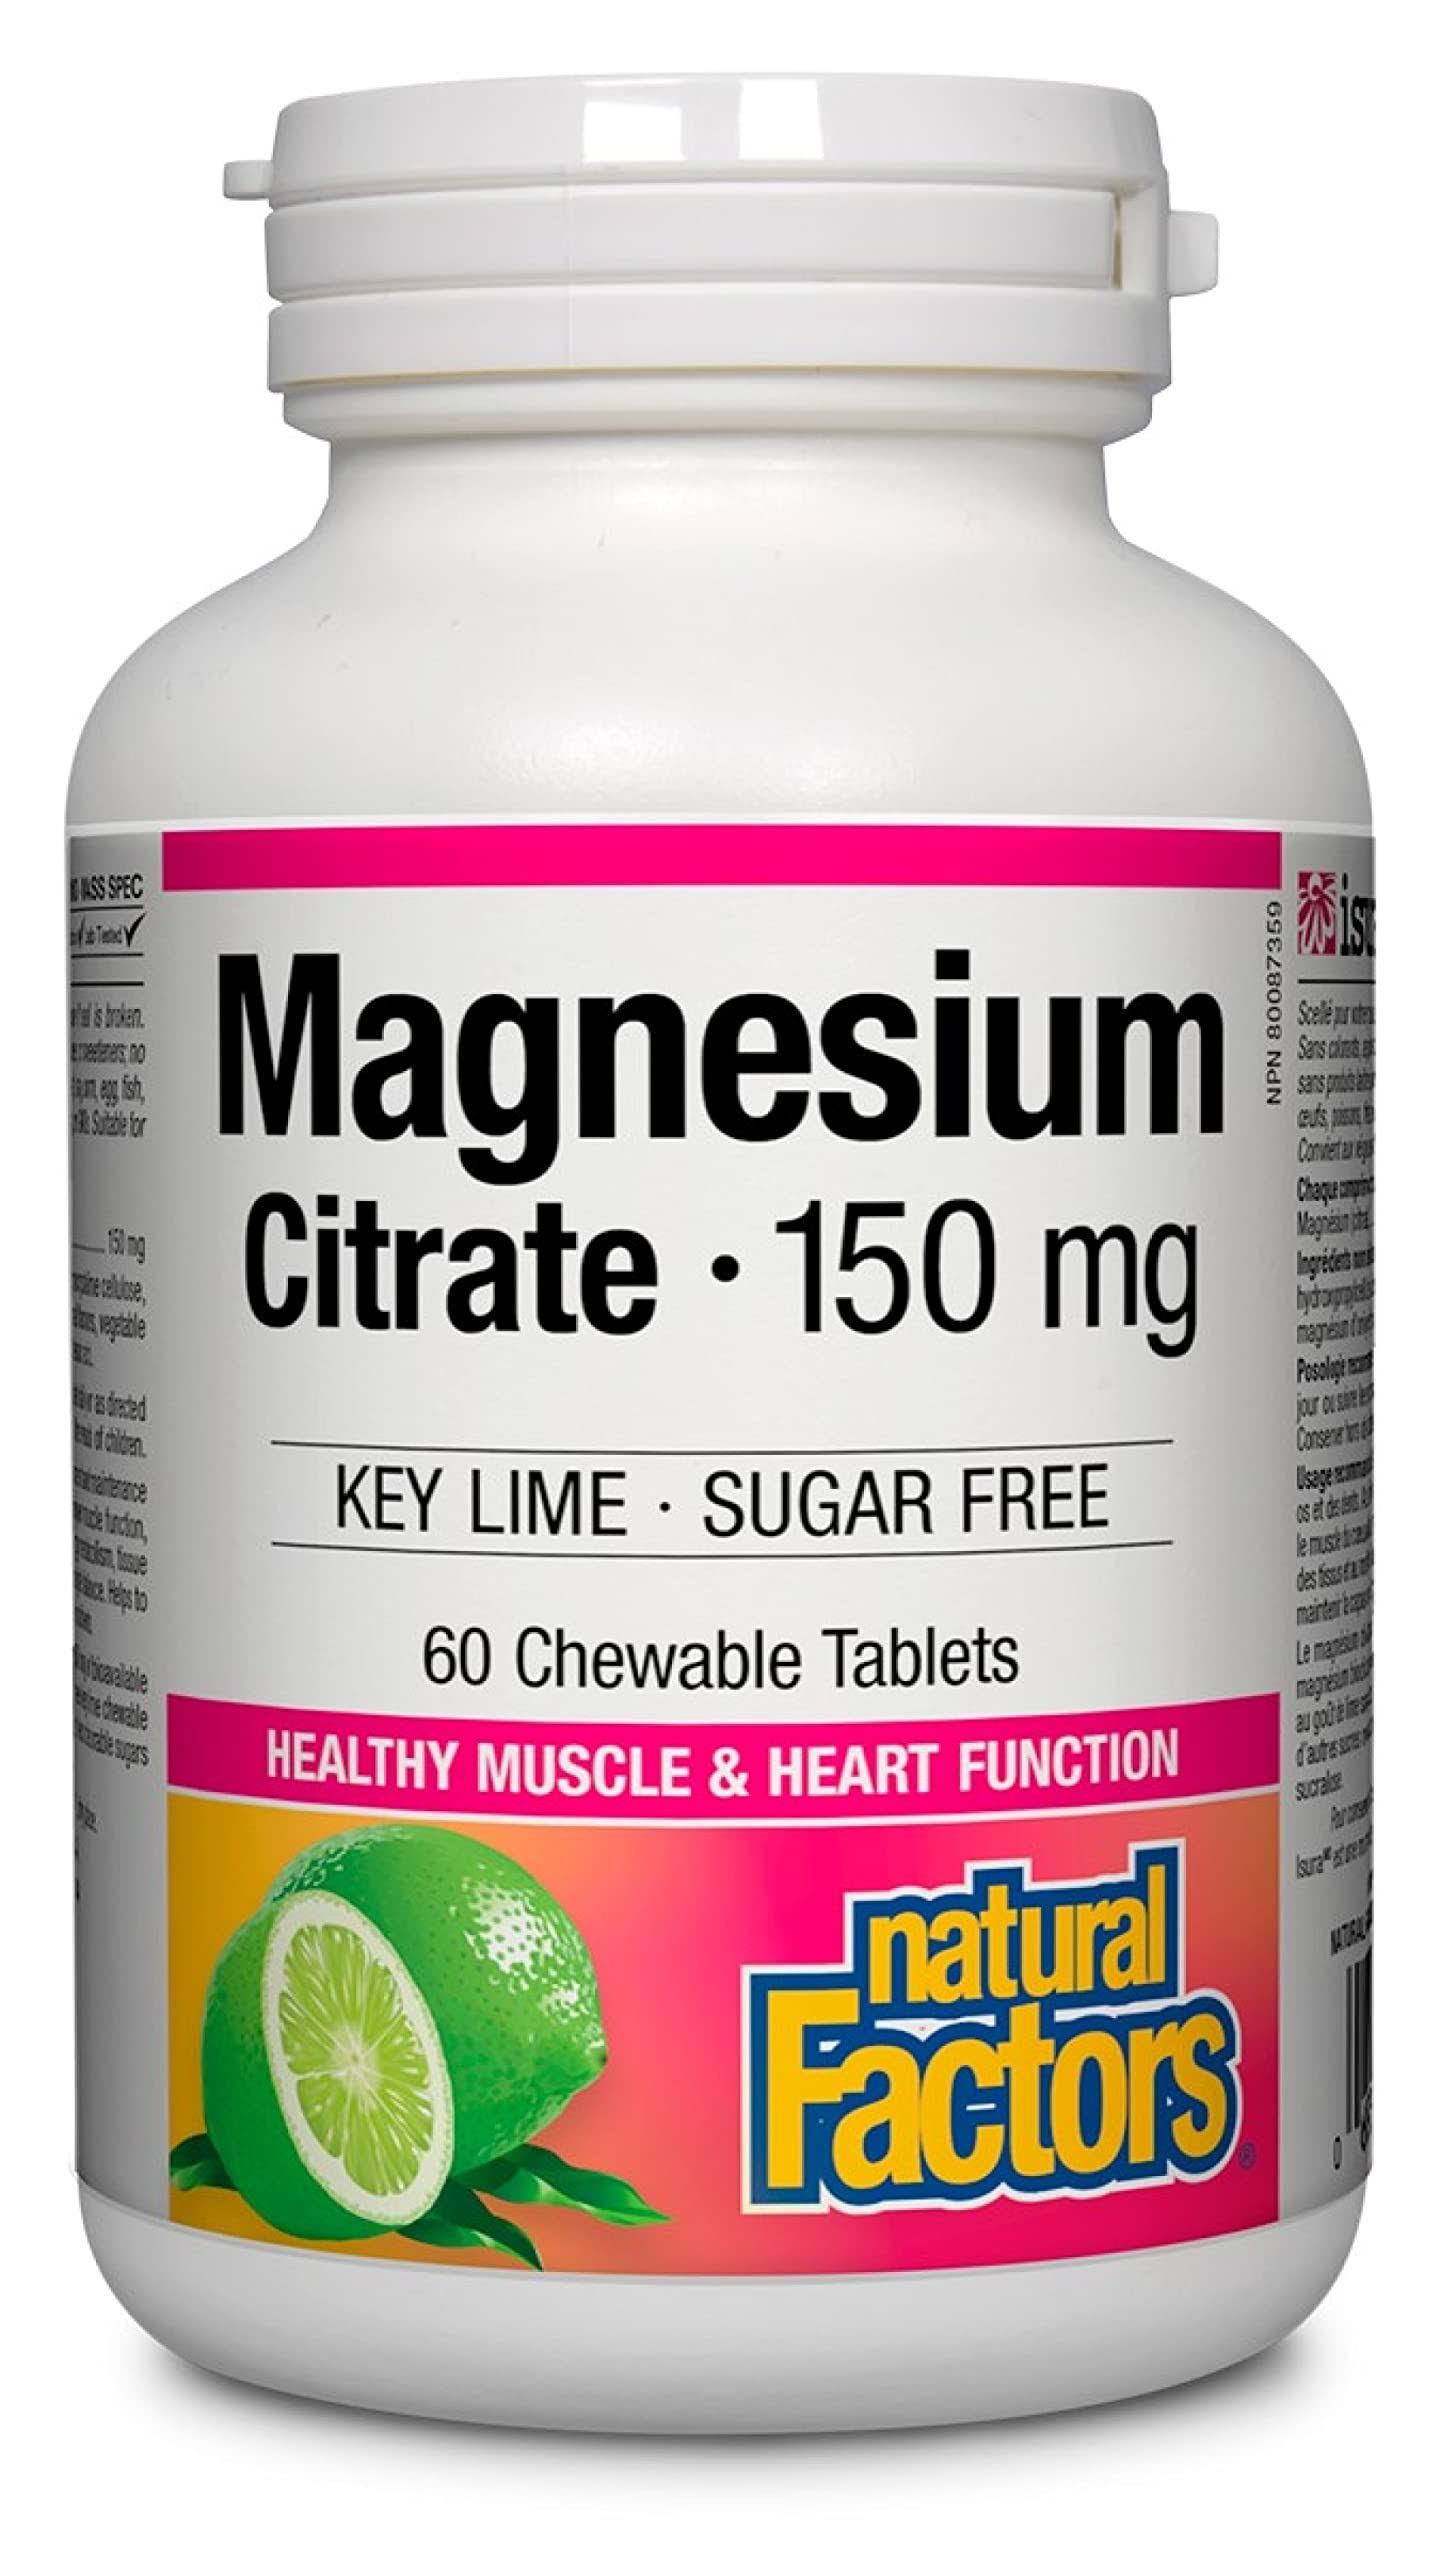 Natural Factors Magnesium Citrate Key Lime 150 mg 60 Chewable Tablets